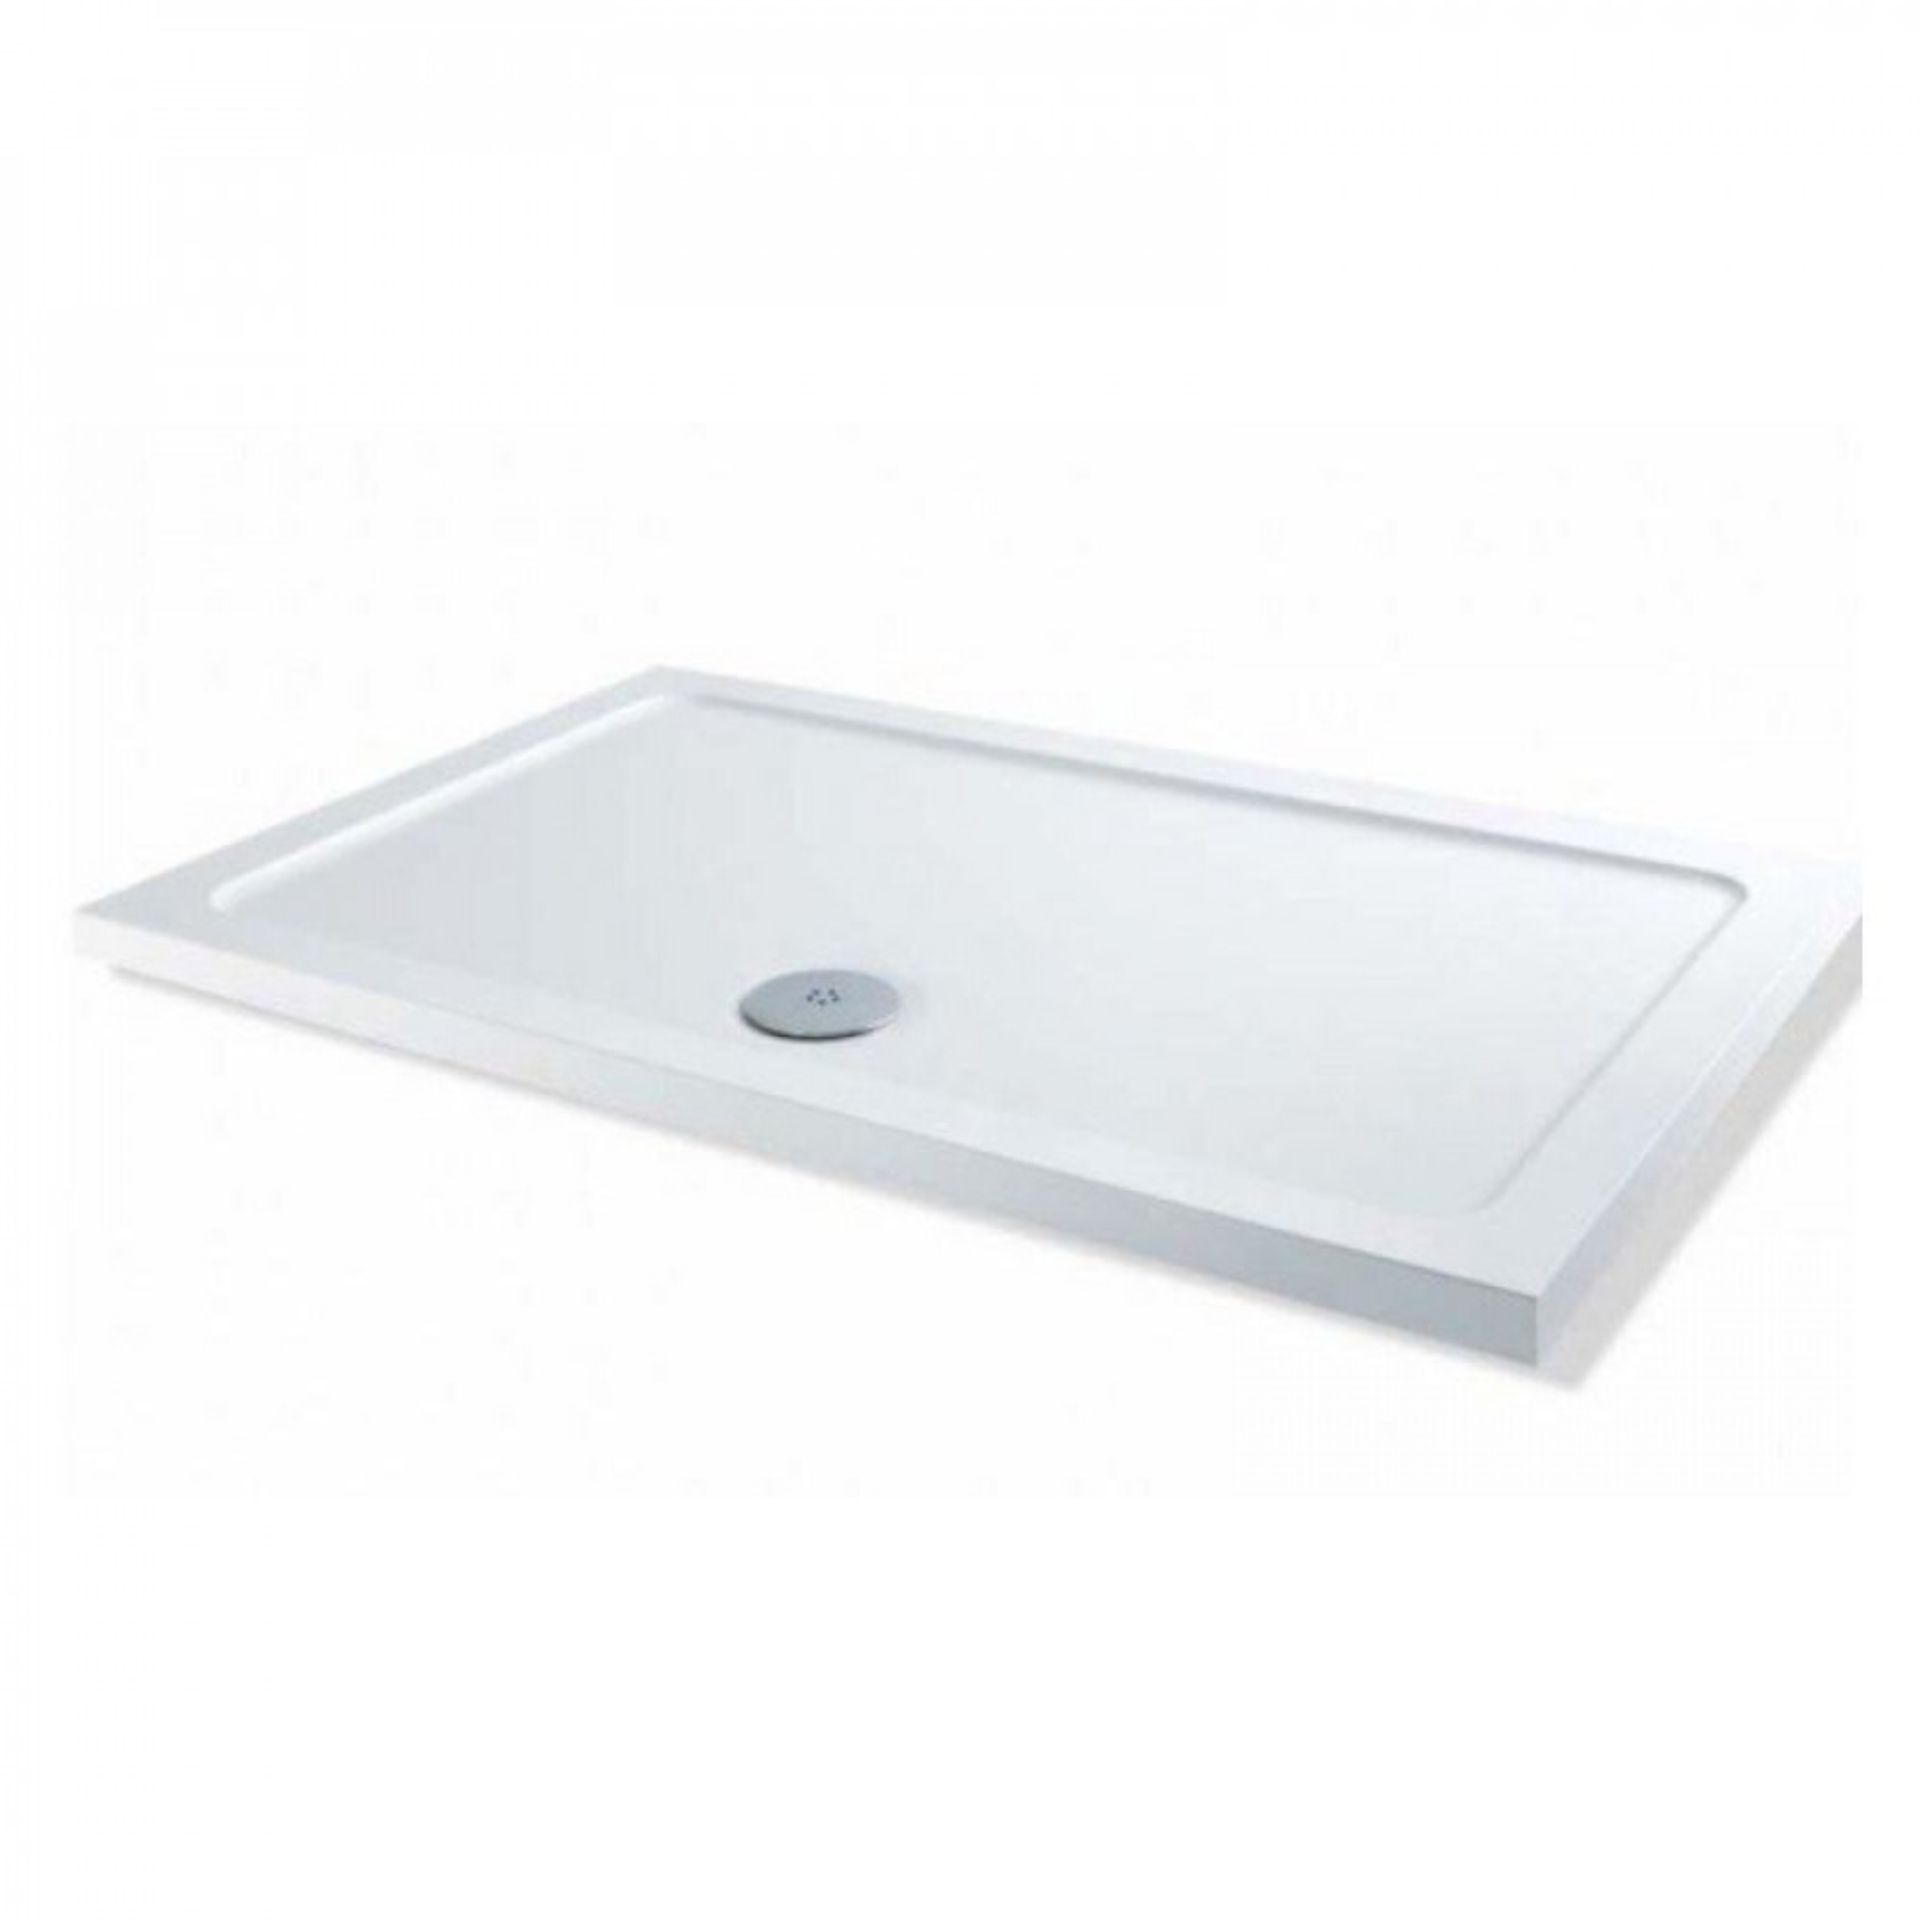 Elements 1200 x 800mm Large Stone Resin Shower Tray. Appears Unused.